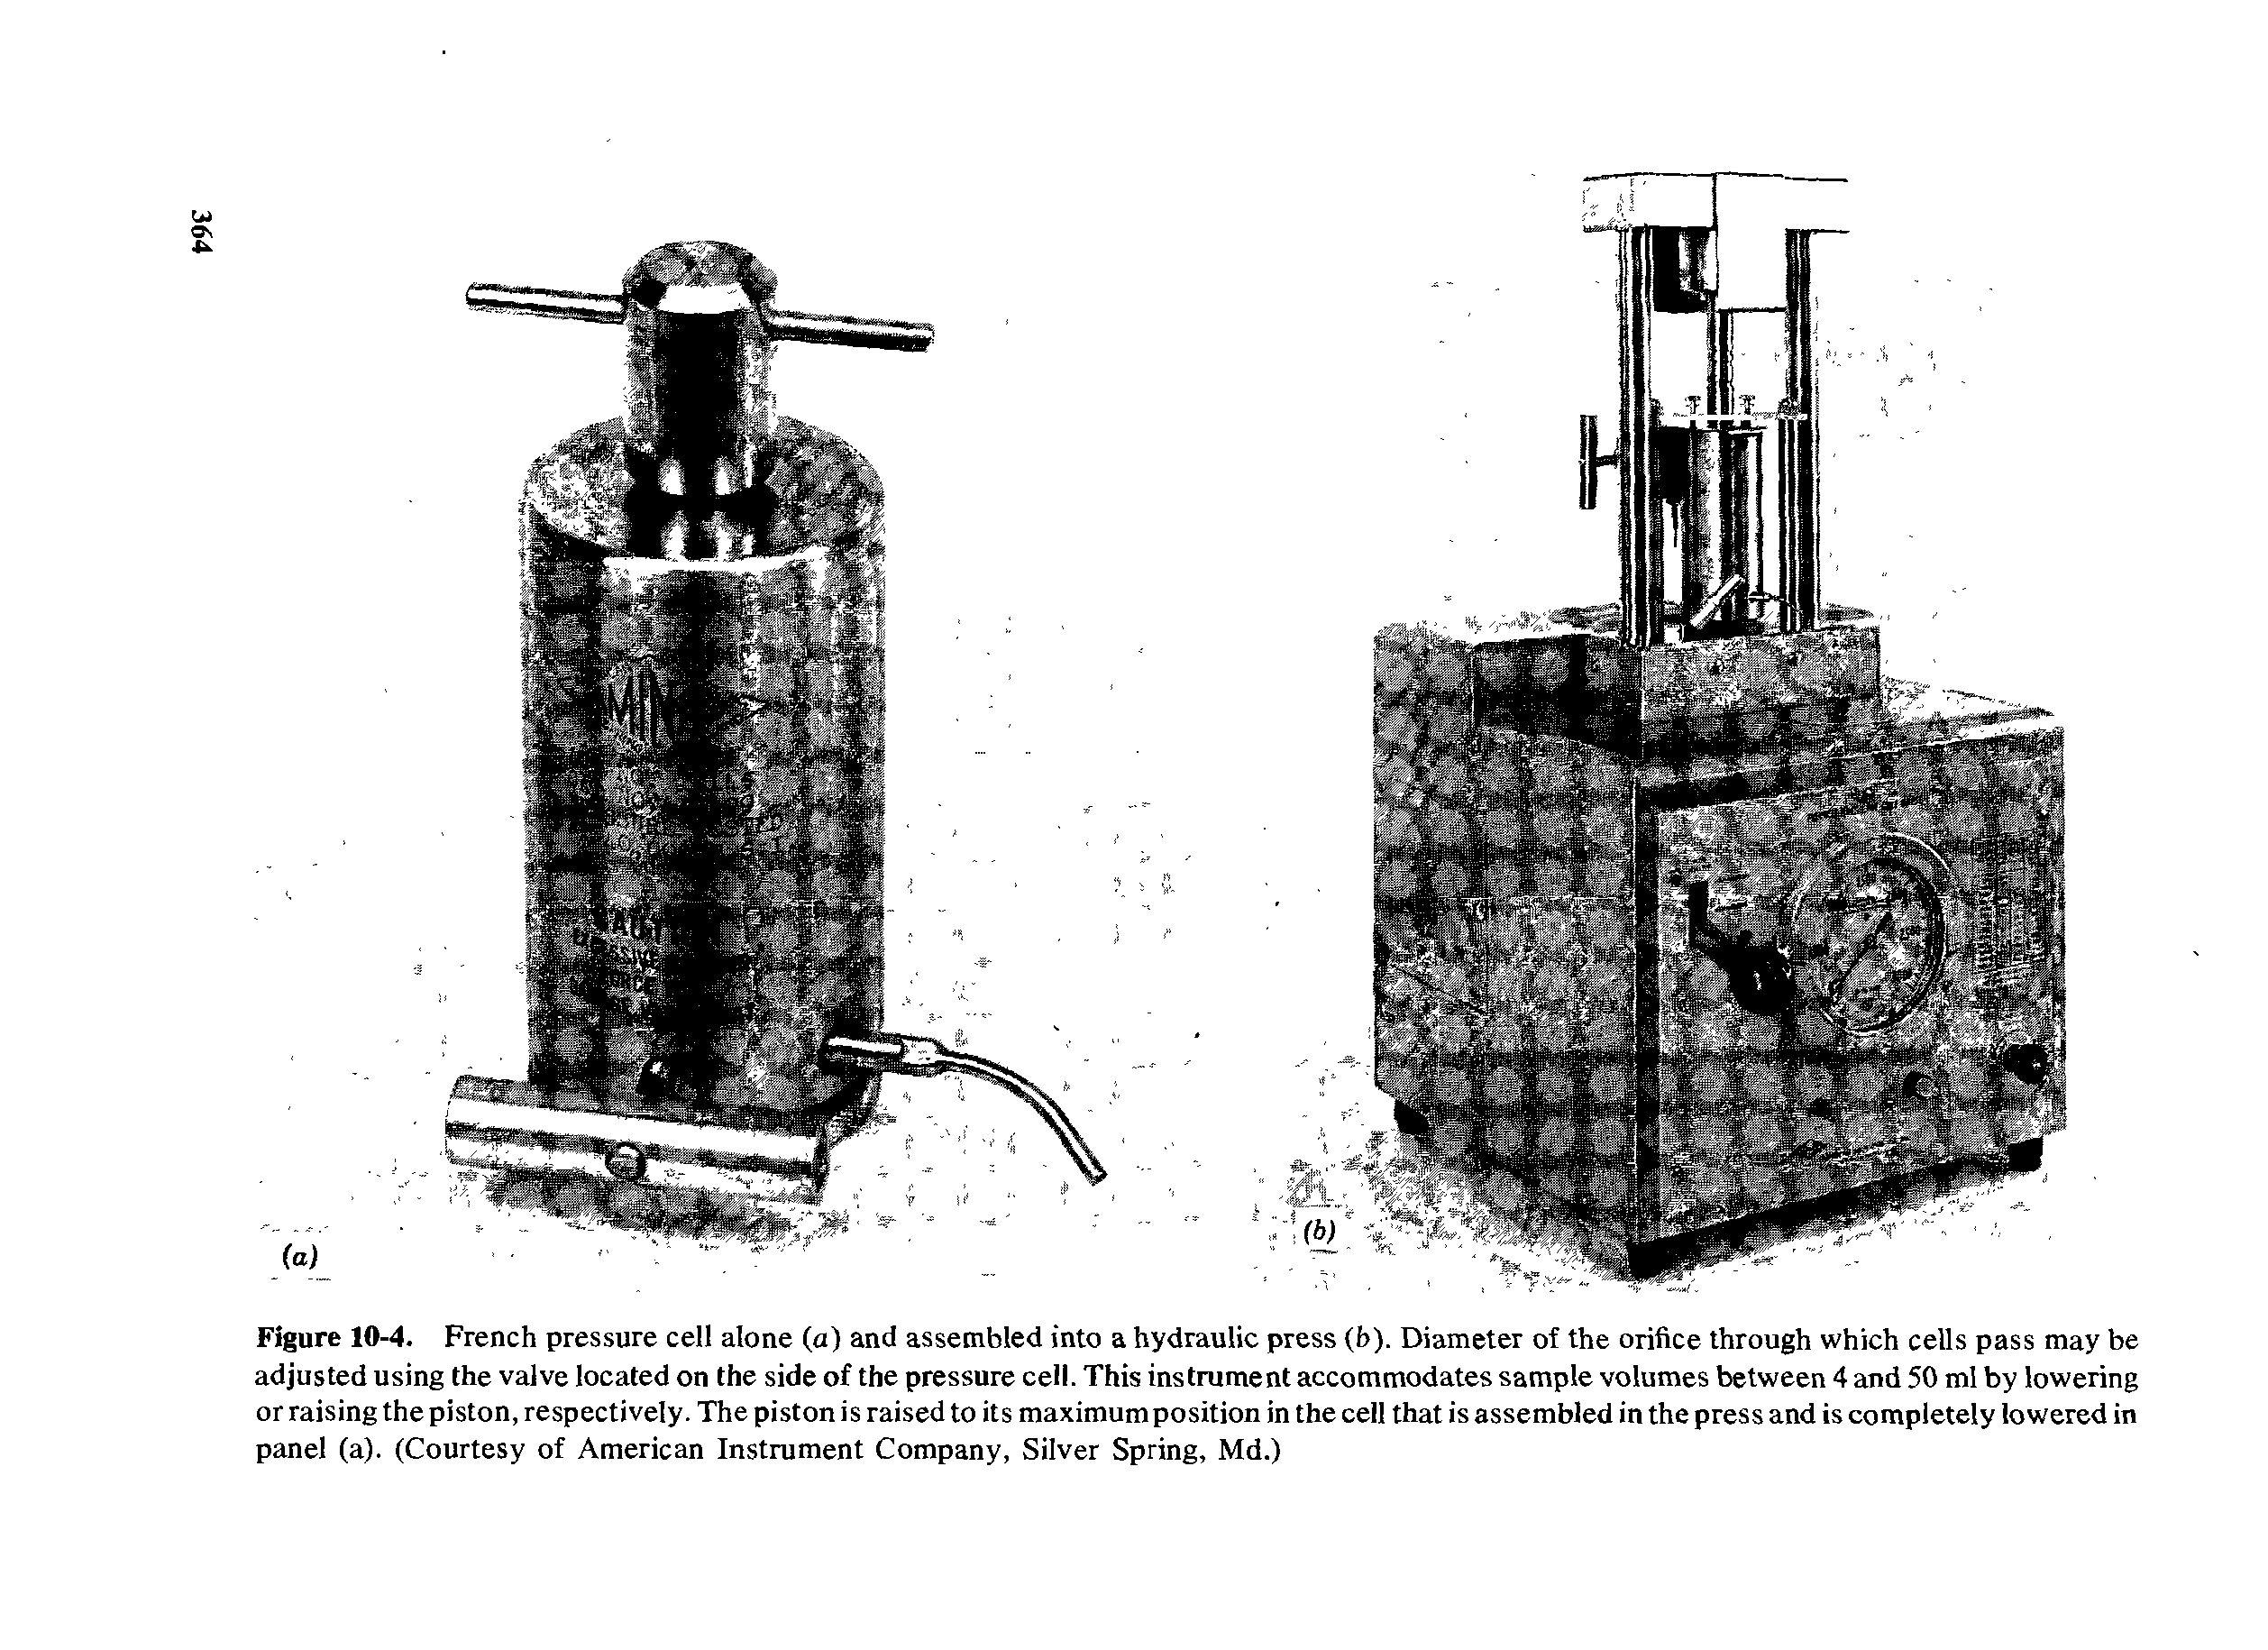 Figure 10-4. French pressure cell alone (a) and assembled into a hydraulic press (b). Diameter of the orifice through which cells pass may be adjusted using the valve located on the side of the pressure cell. This instrument accommodates sample volumes between 4 and 50 ml by lowering or raising the piston, respectively. The piston is raised to its maximum position in the cell that is assembled in the press and is completely lowered in panel (a). (Courtesy of American Instrument Company, Silver Spring, Md.)...